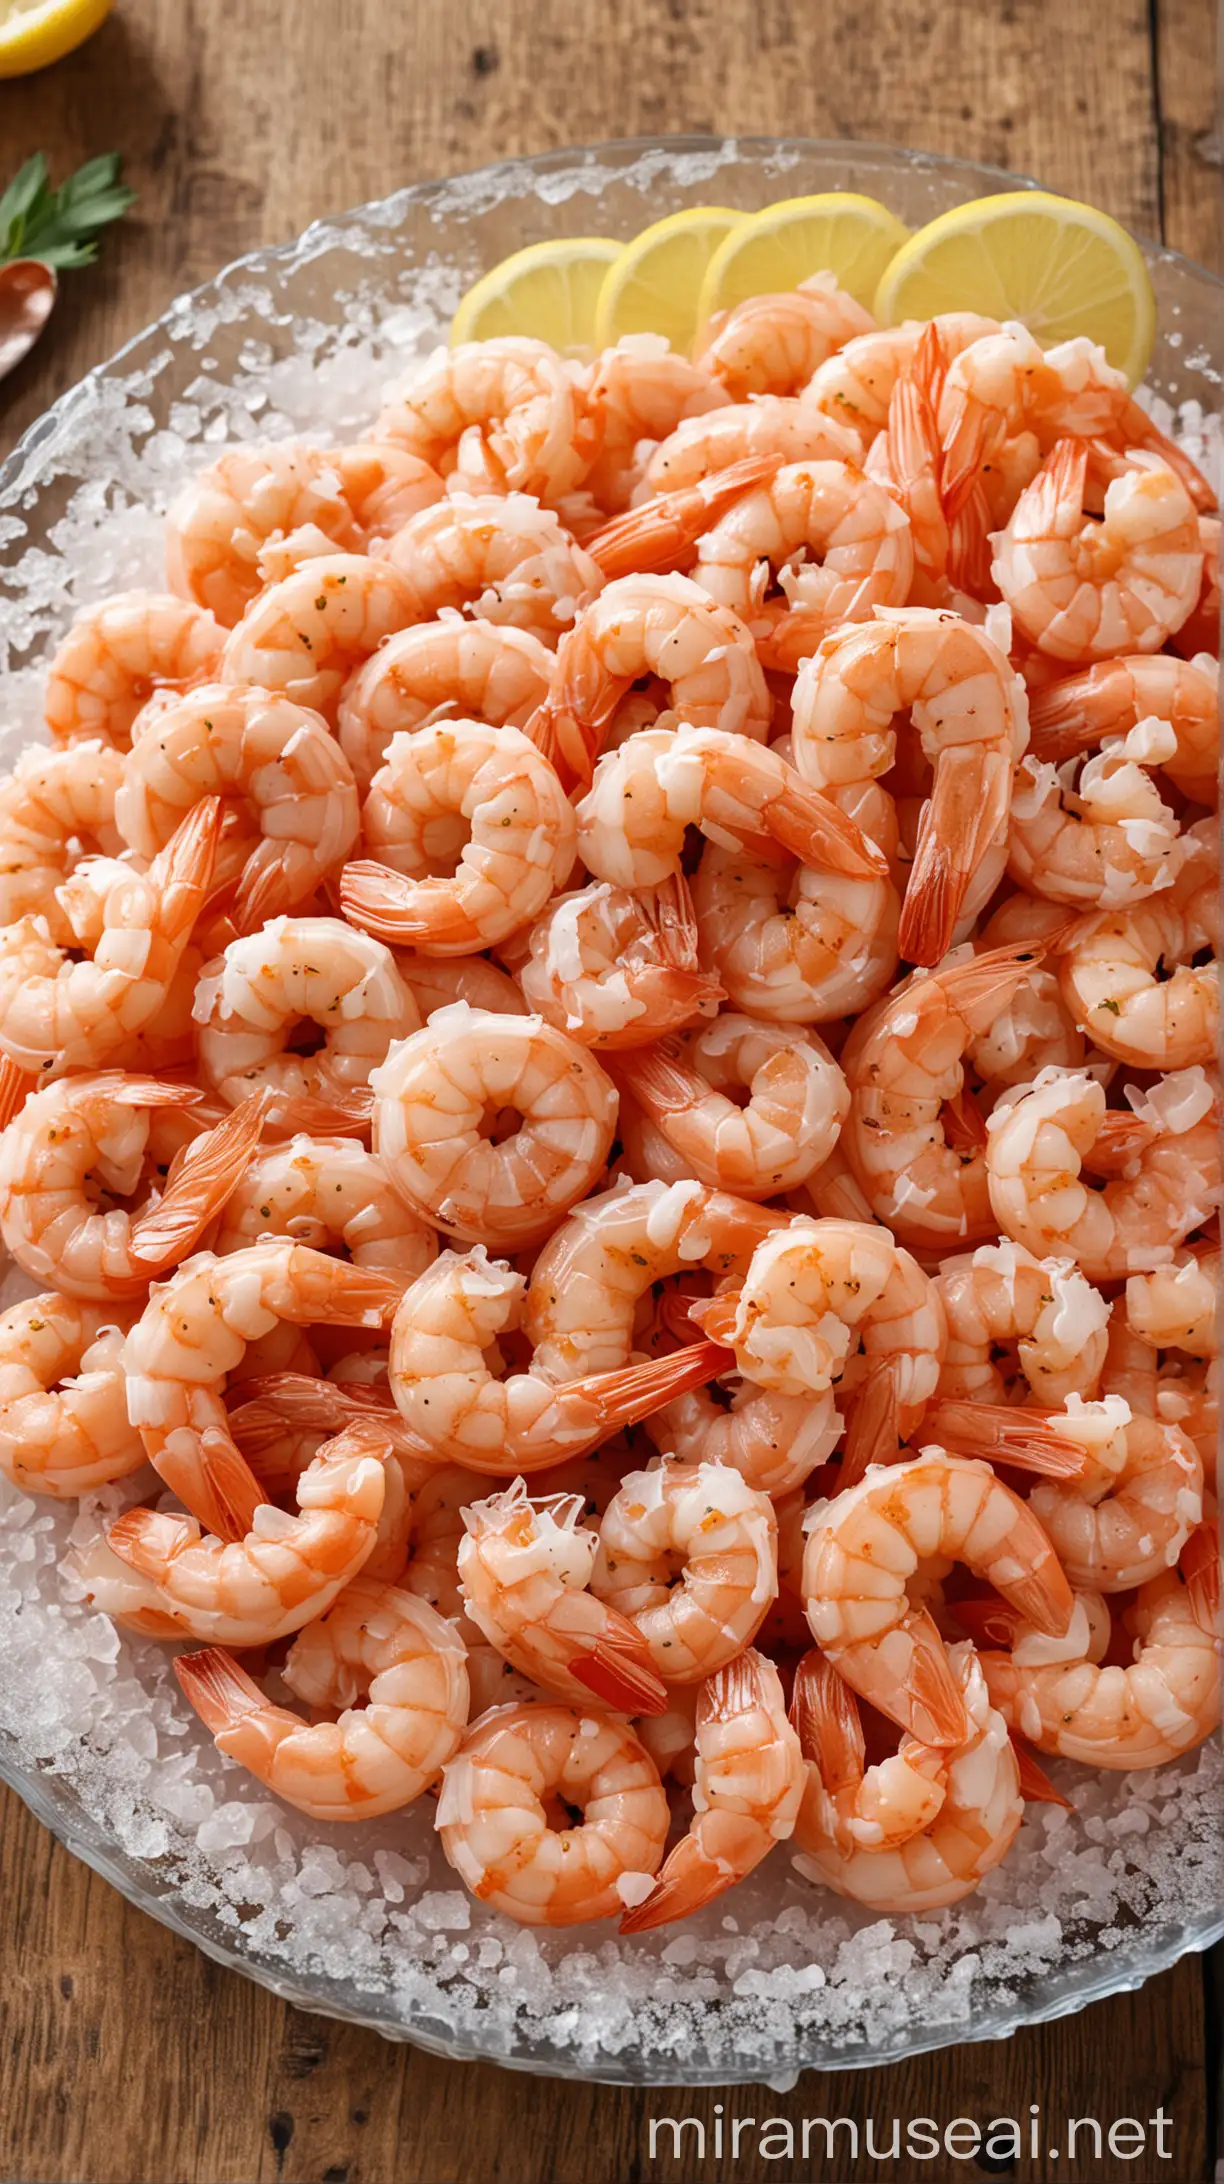 Delicious Frozen Shrimp Served on the Table